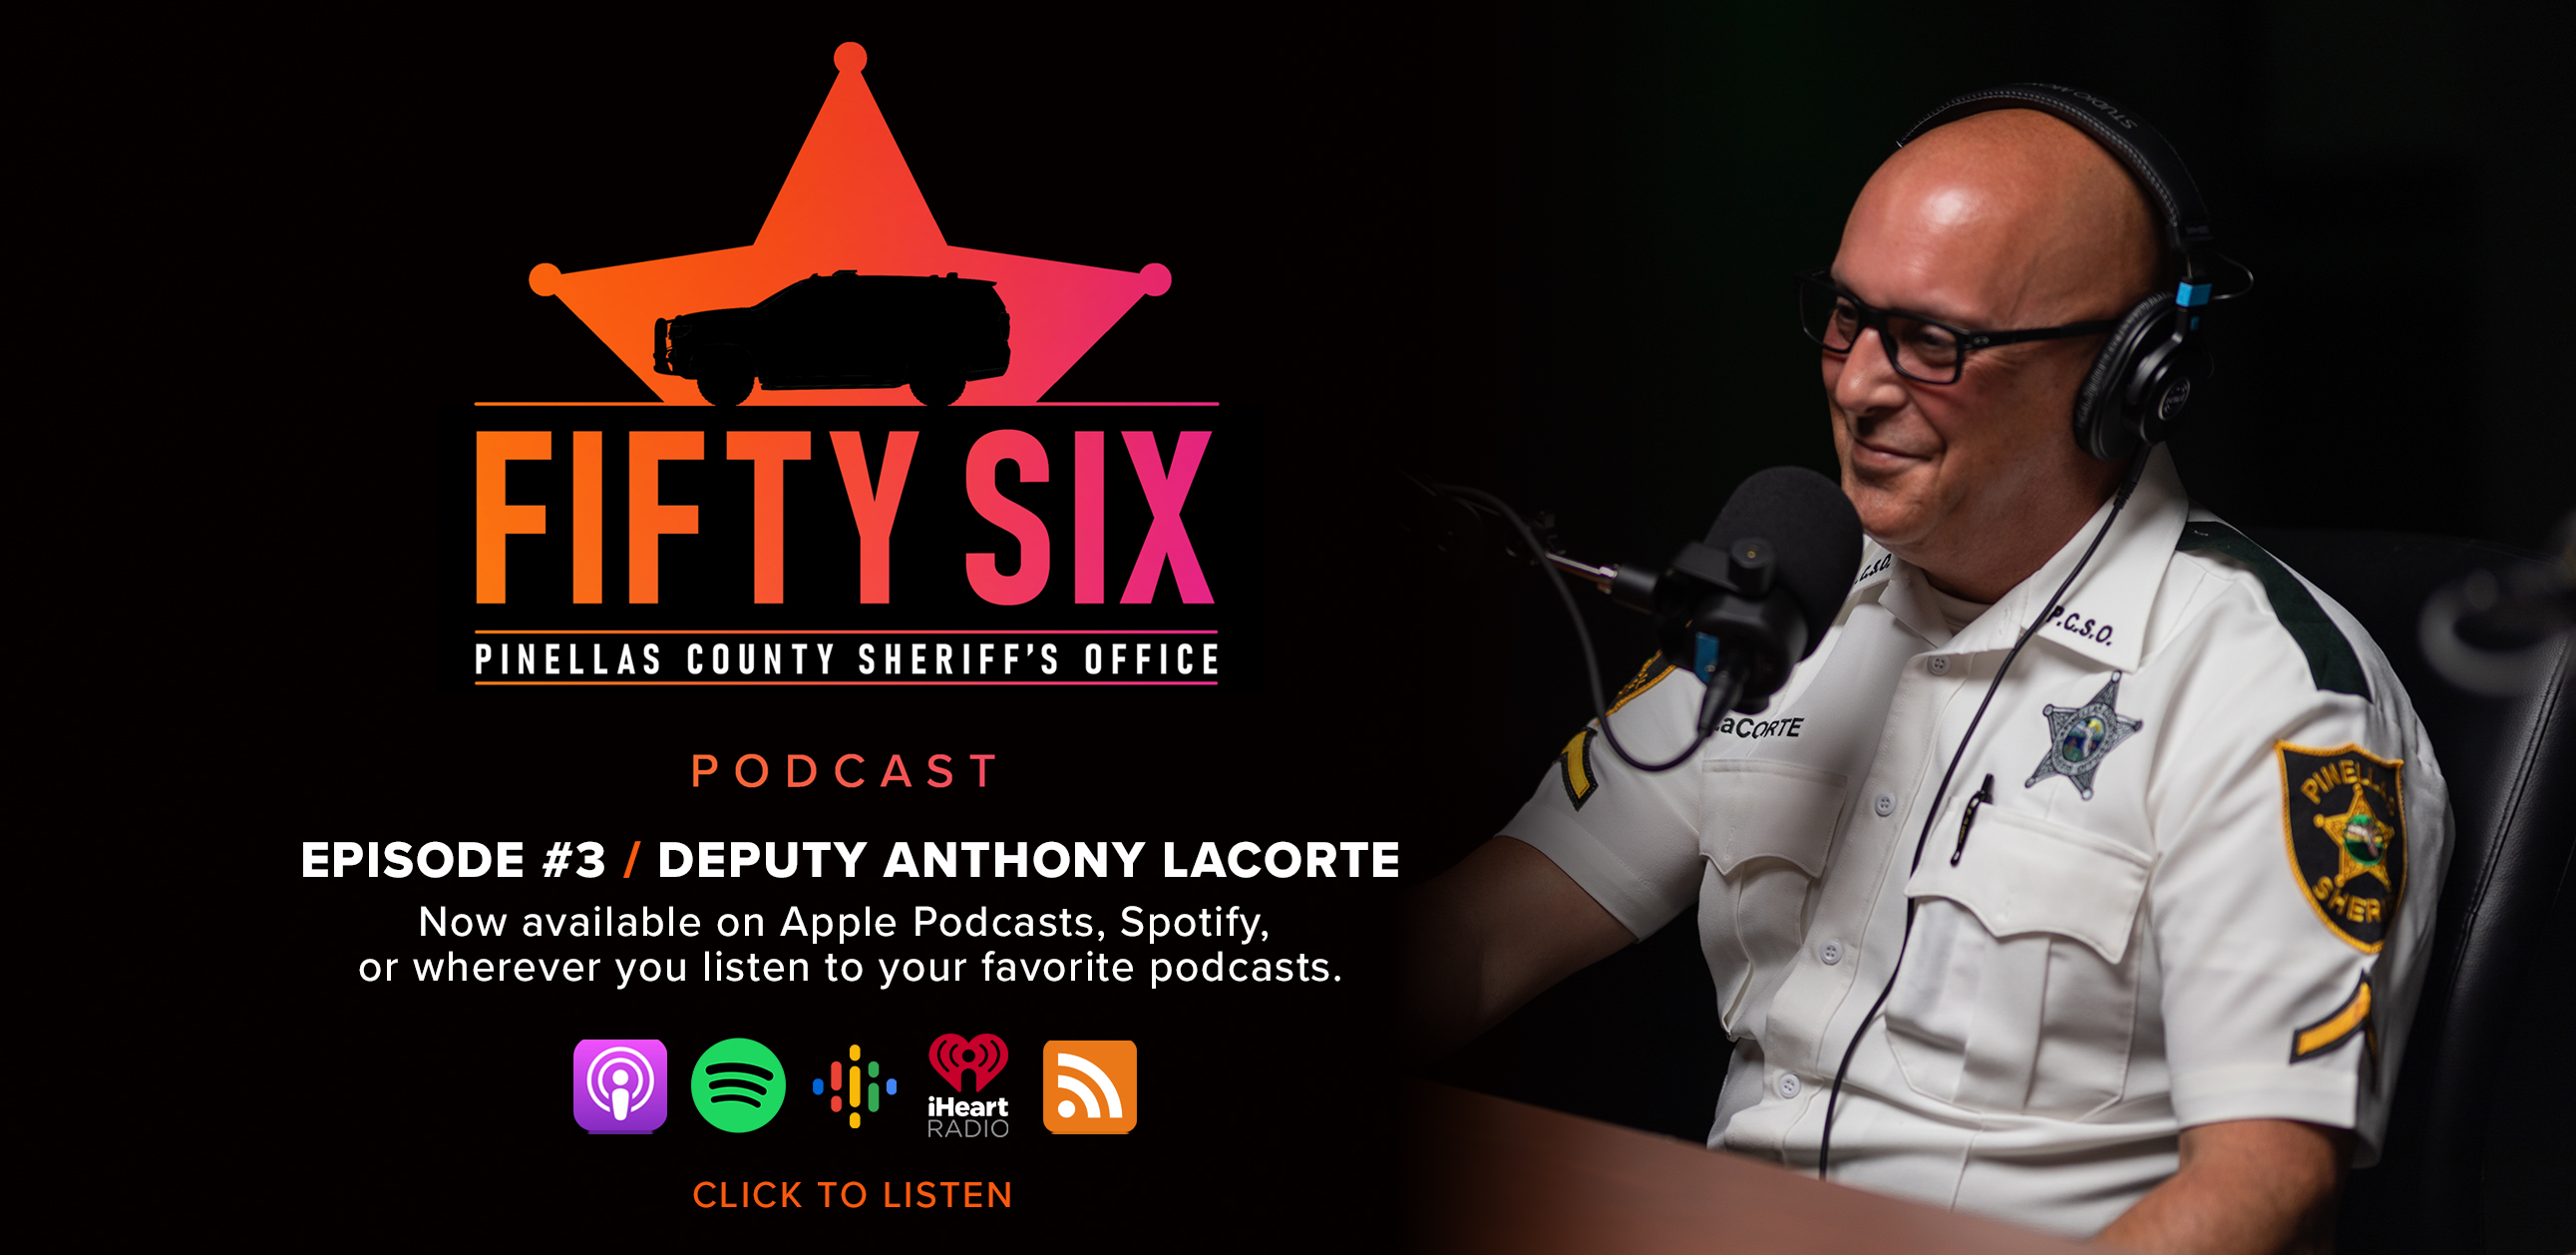 Fifty Six, Pinellas County Sheriff's Office Podcast, Episode #3 Deputy Anthony LaCorte, Now Available on Apple Podcasts, Click to Listen